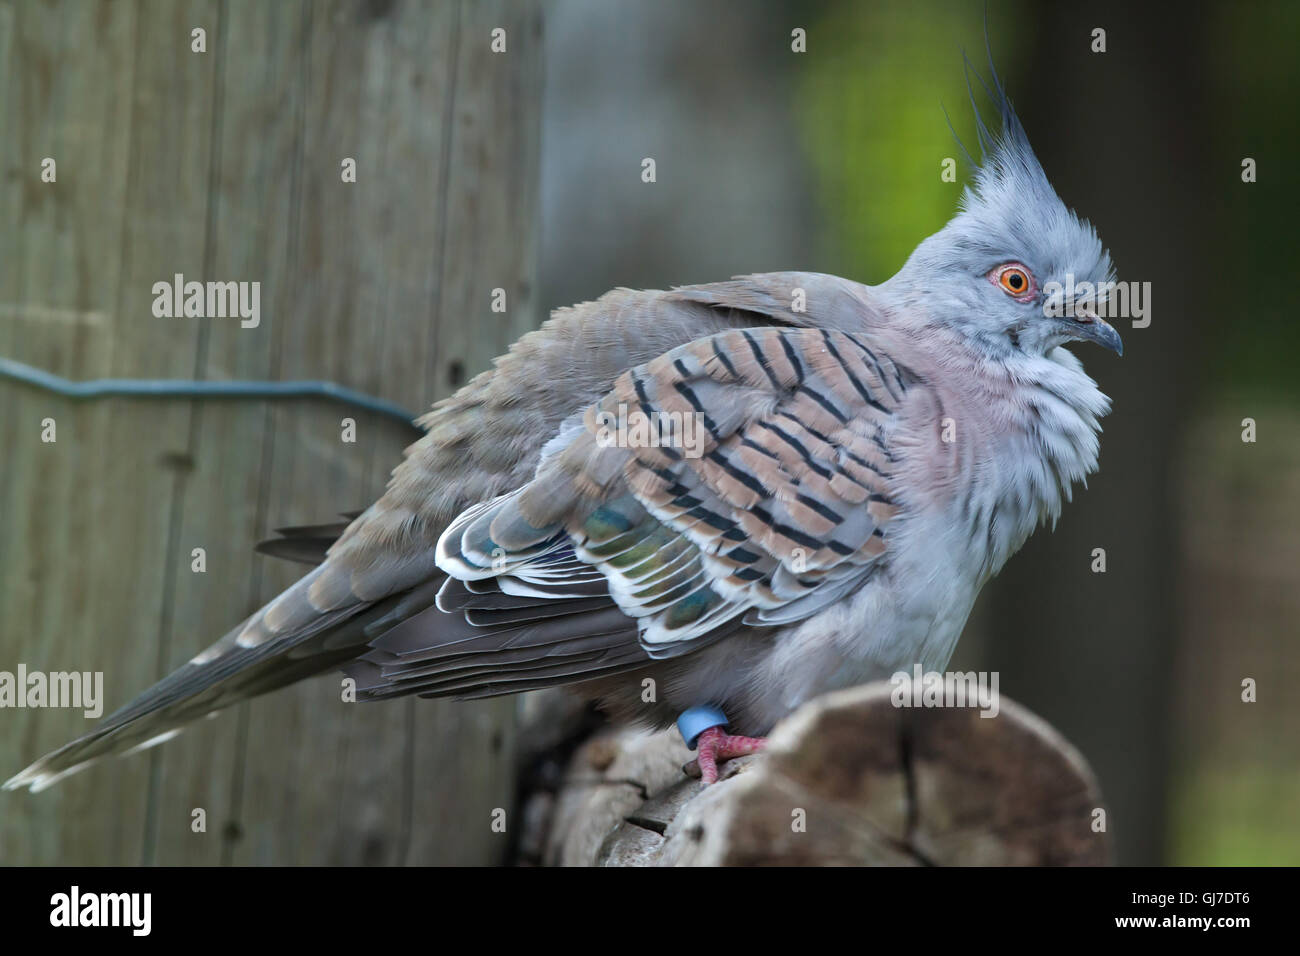 Crested pigeon (Ocyphaps lophotes) at Decin Zoo in North Bohemia, Czech Republic. Stock Photo